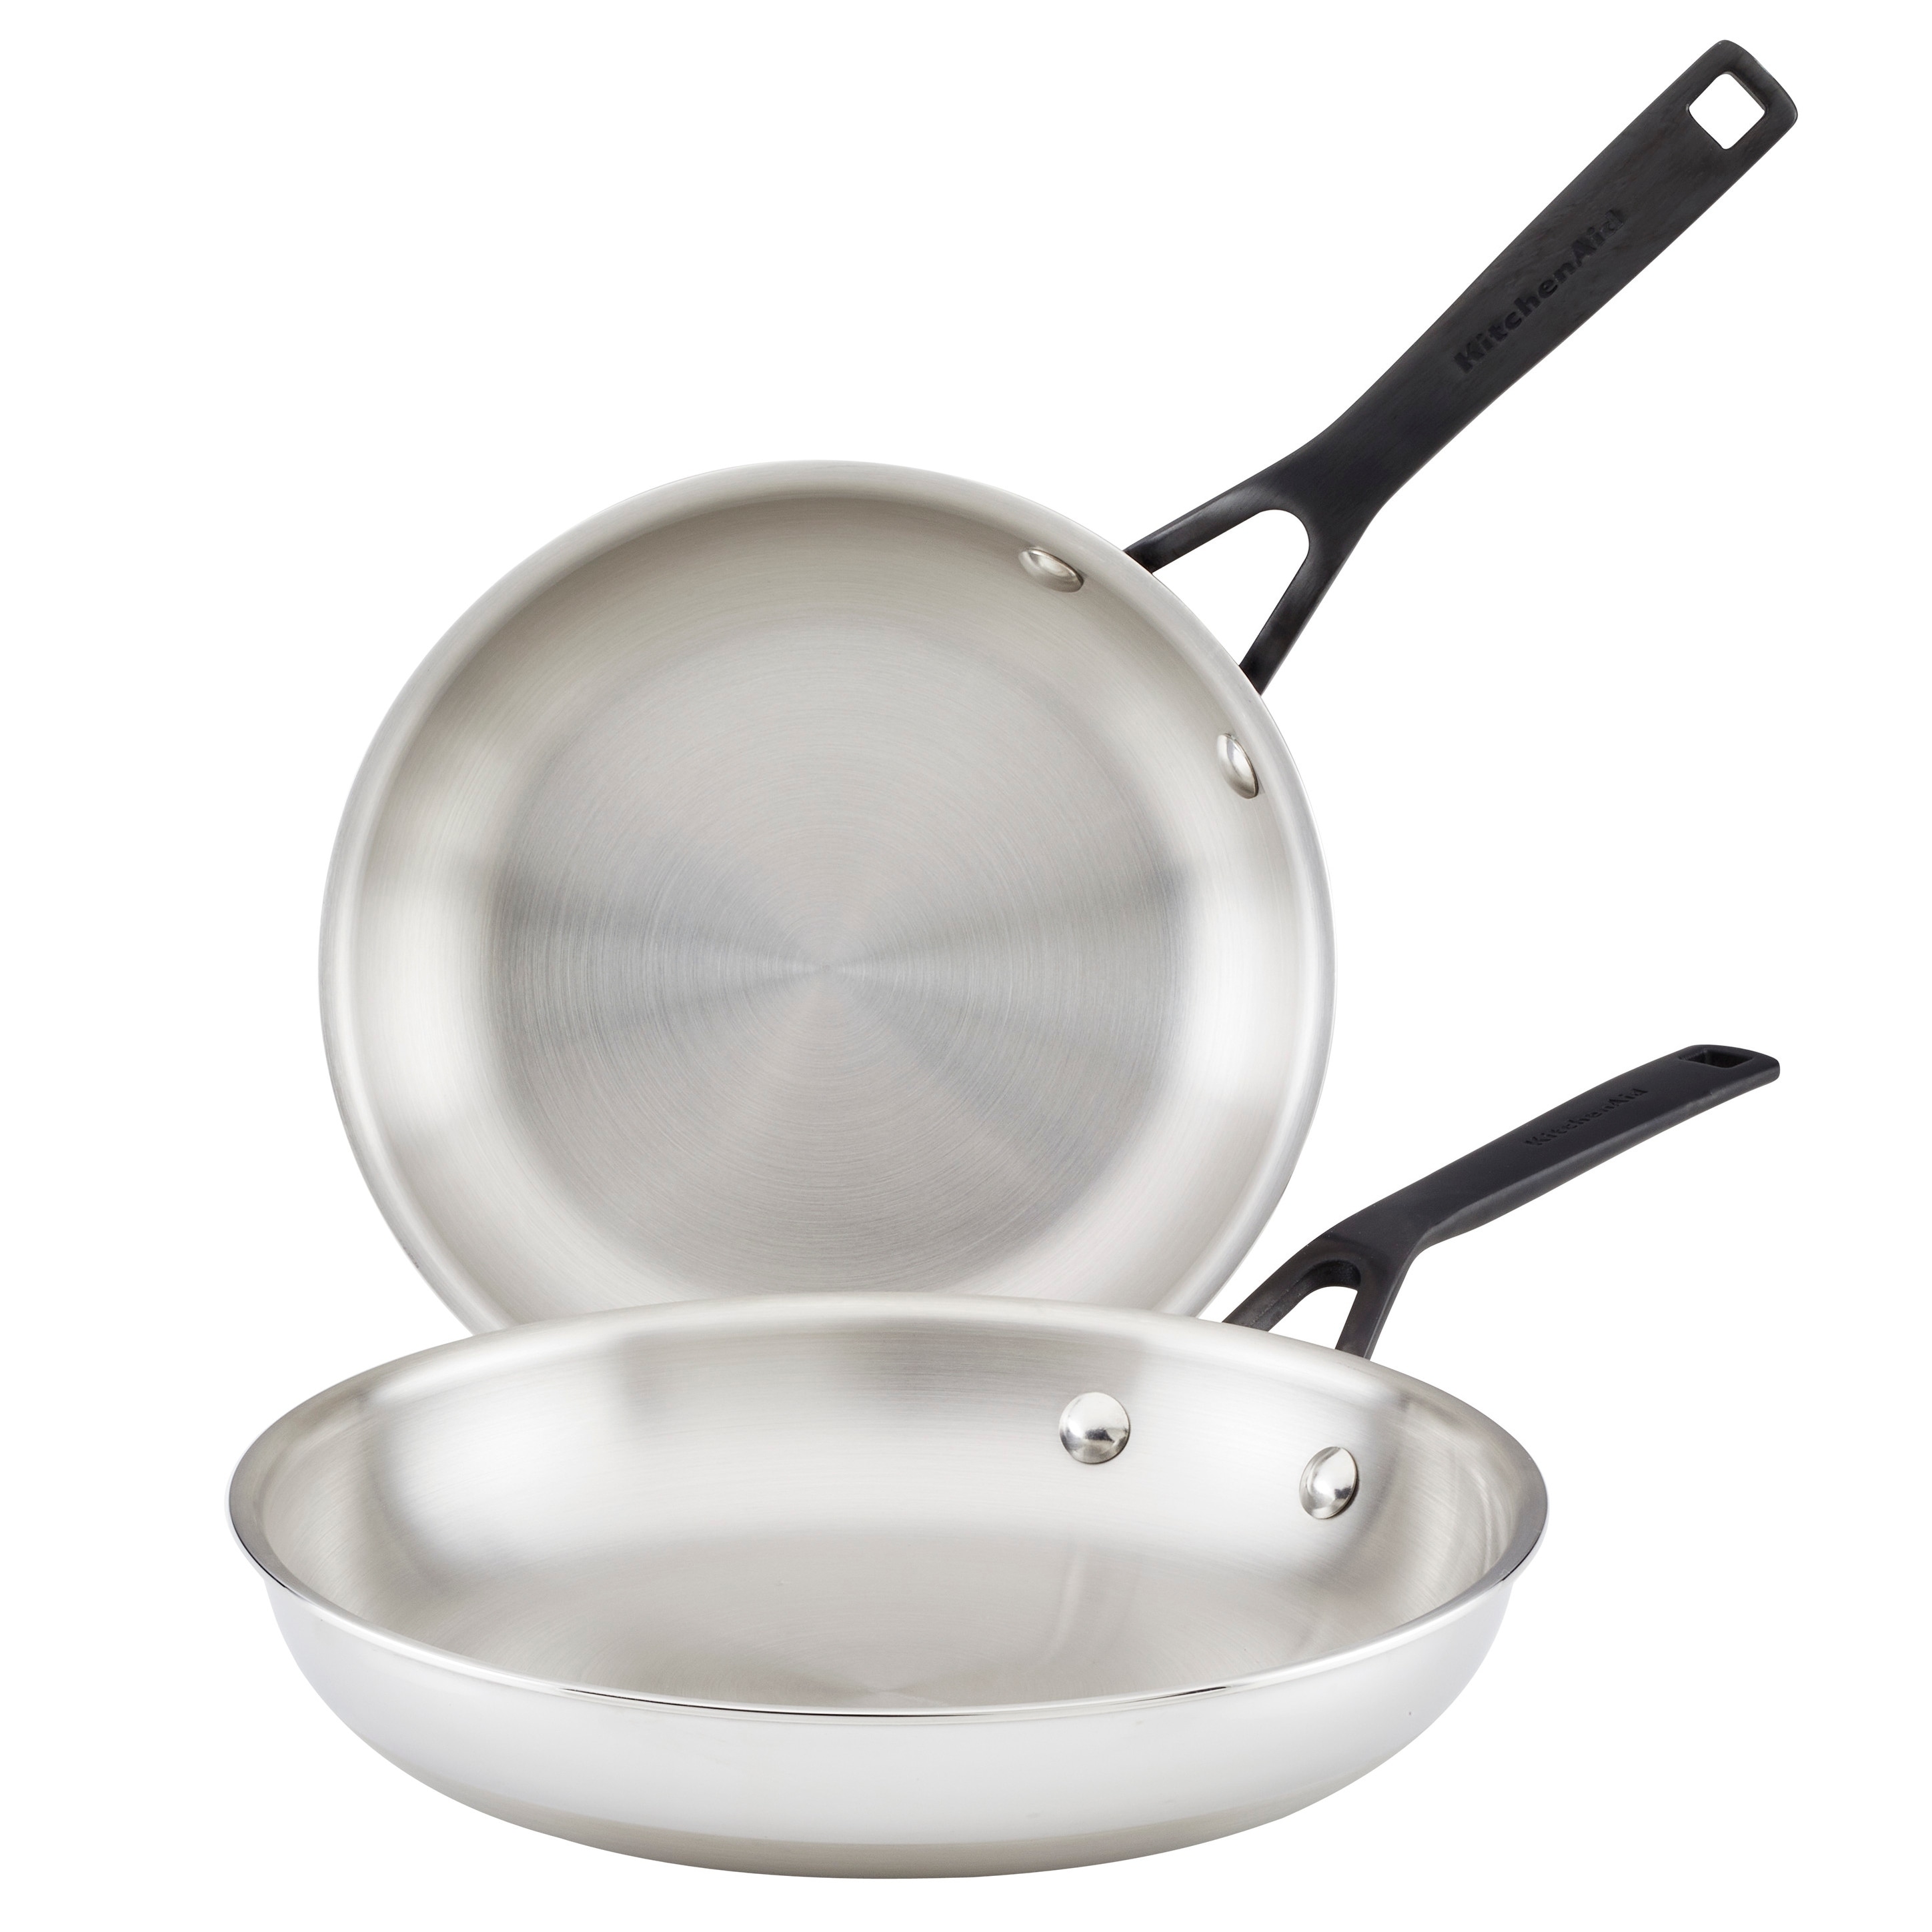 KitchenAid 5-Ply Clad Stainless Steel Frying Pan Set, 2pc - Bed